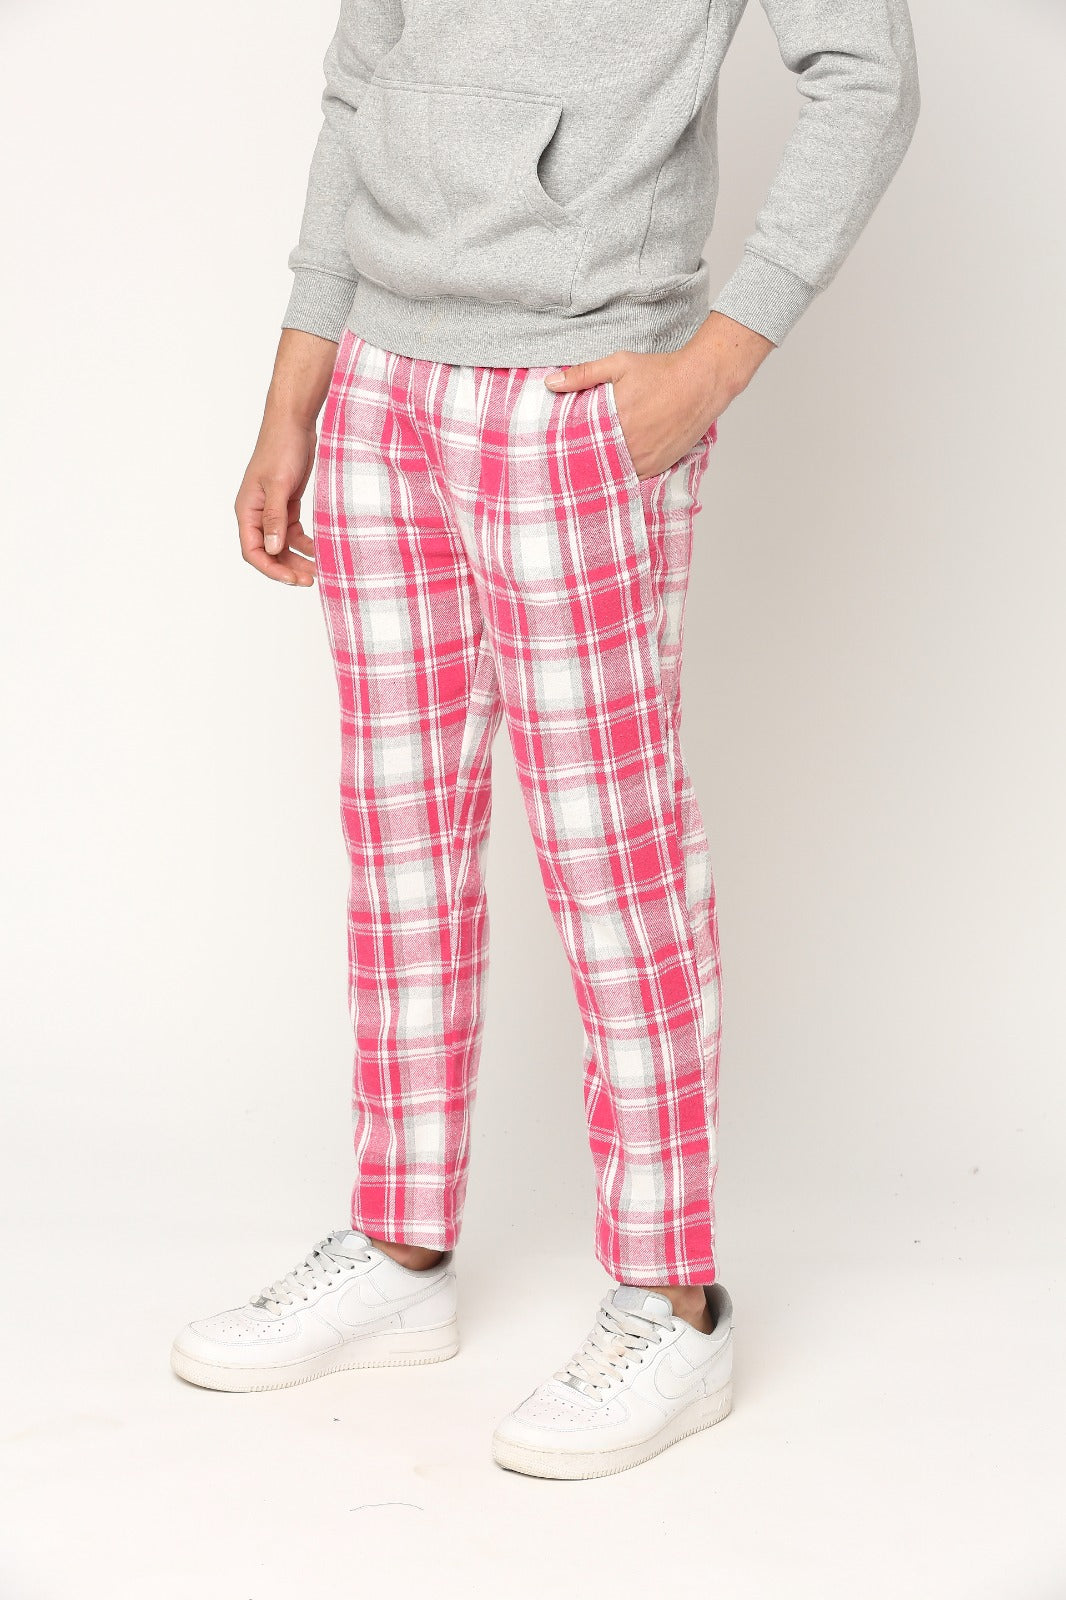 Hemsters White & Coral Checks Lounge Pant For Mens